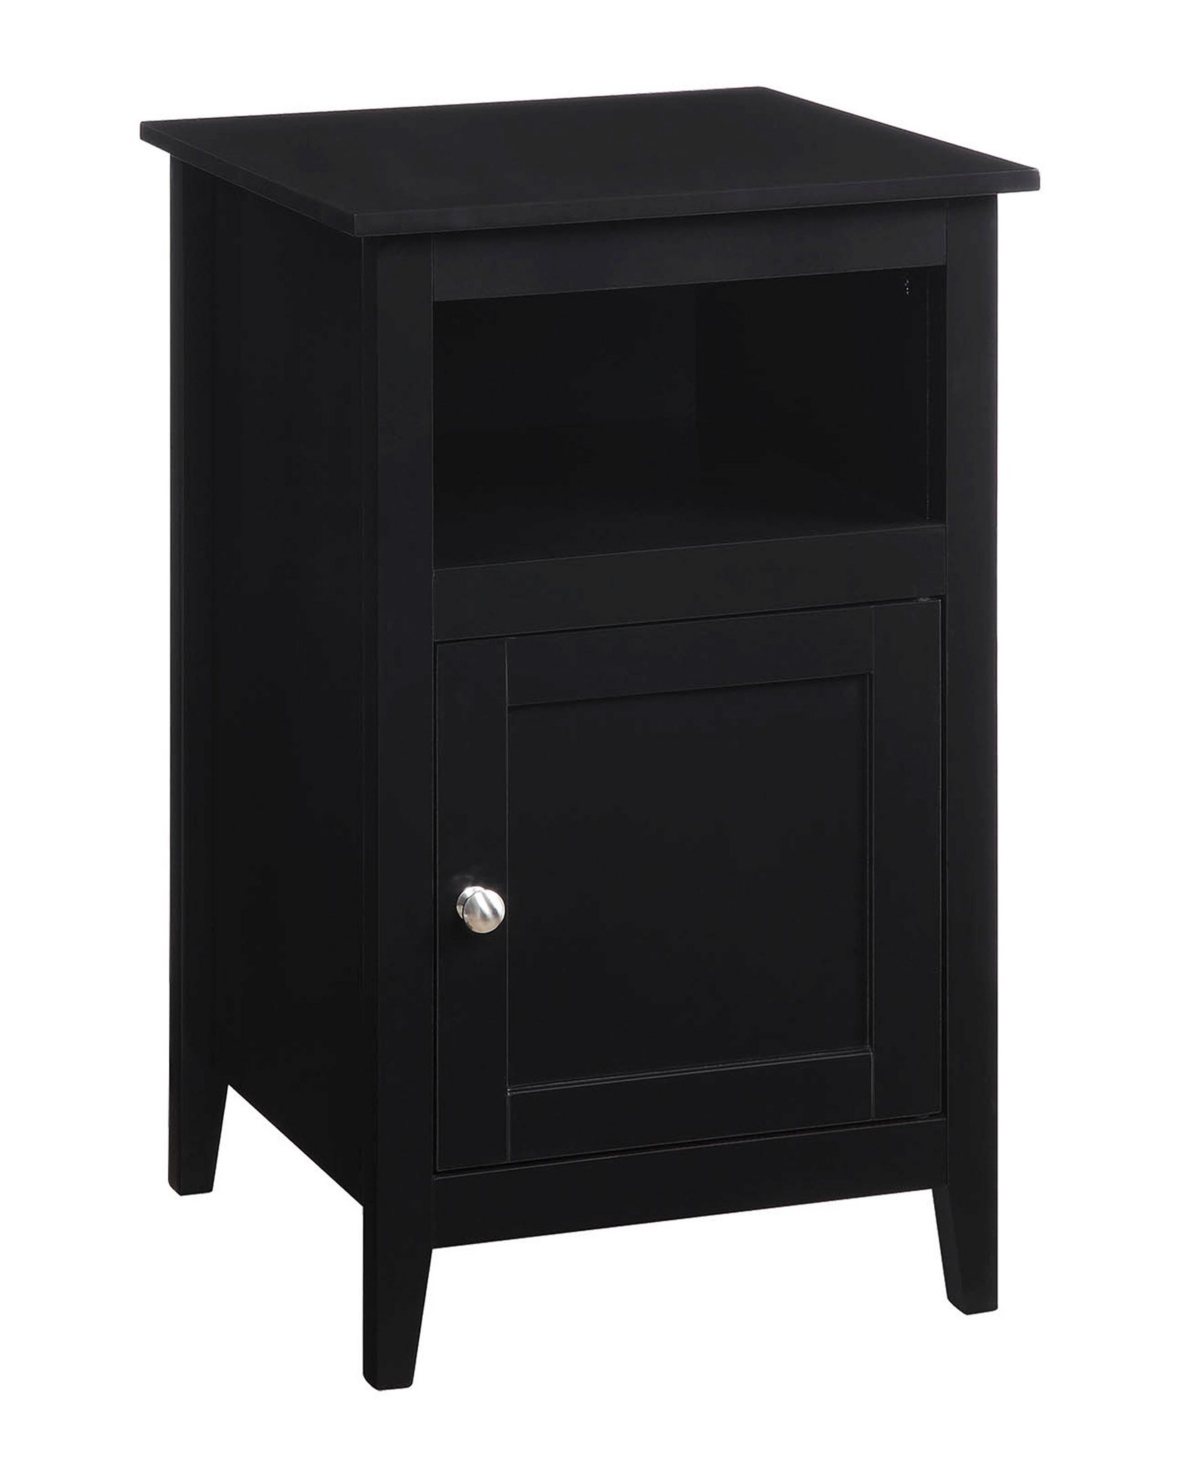 Convenience Concepts Designs2go Storage Cabinet End Table With Shelf In Black